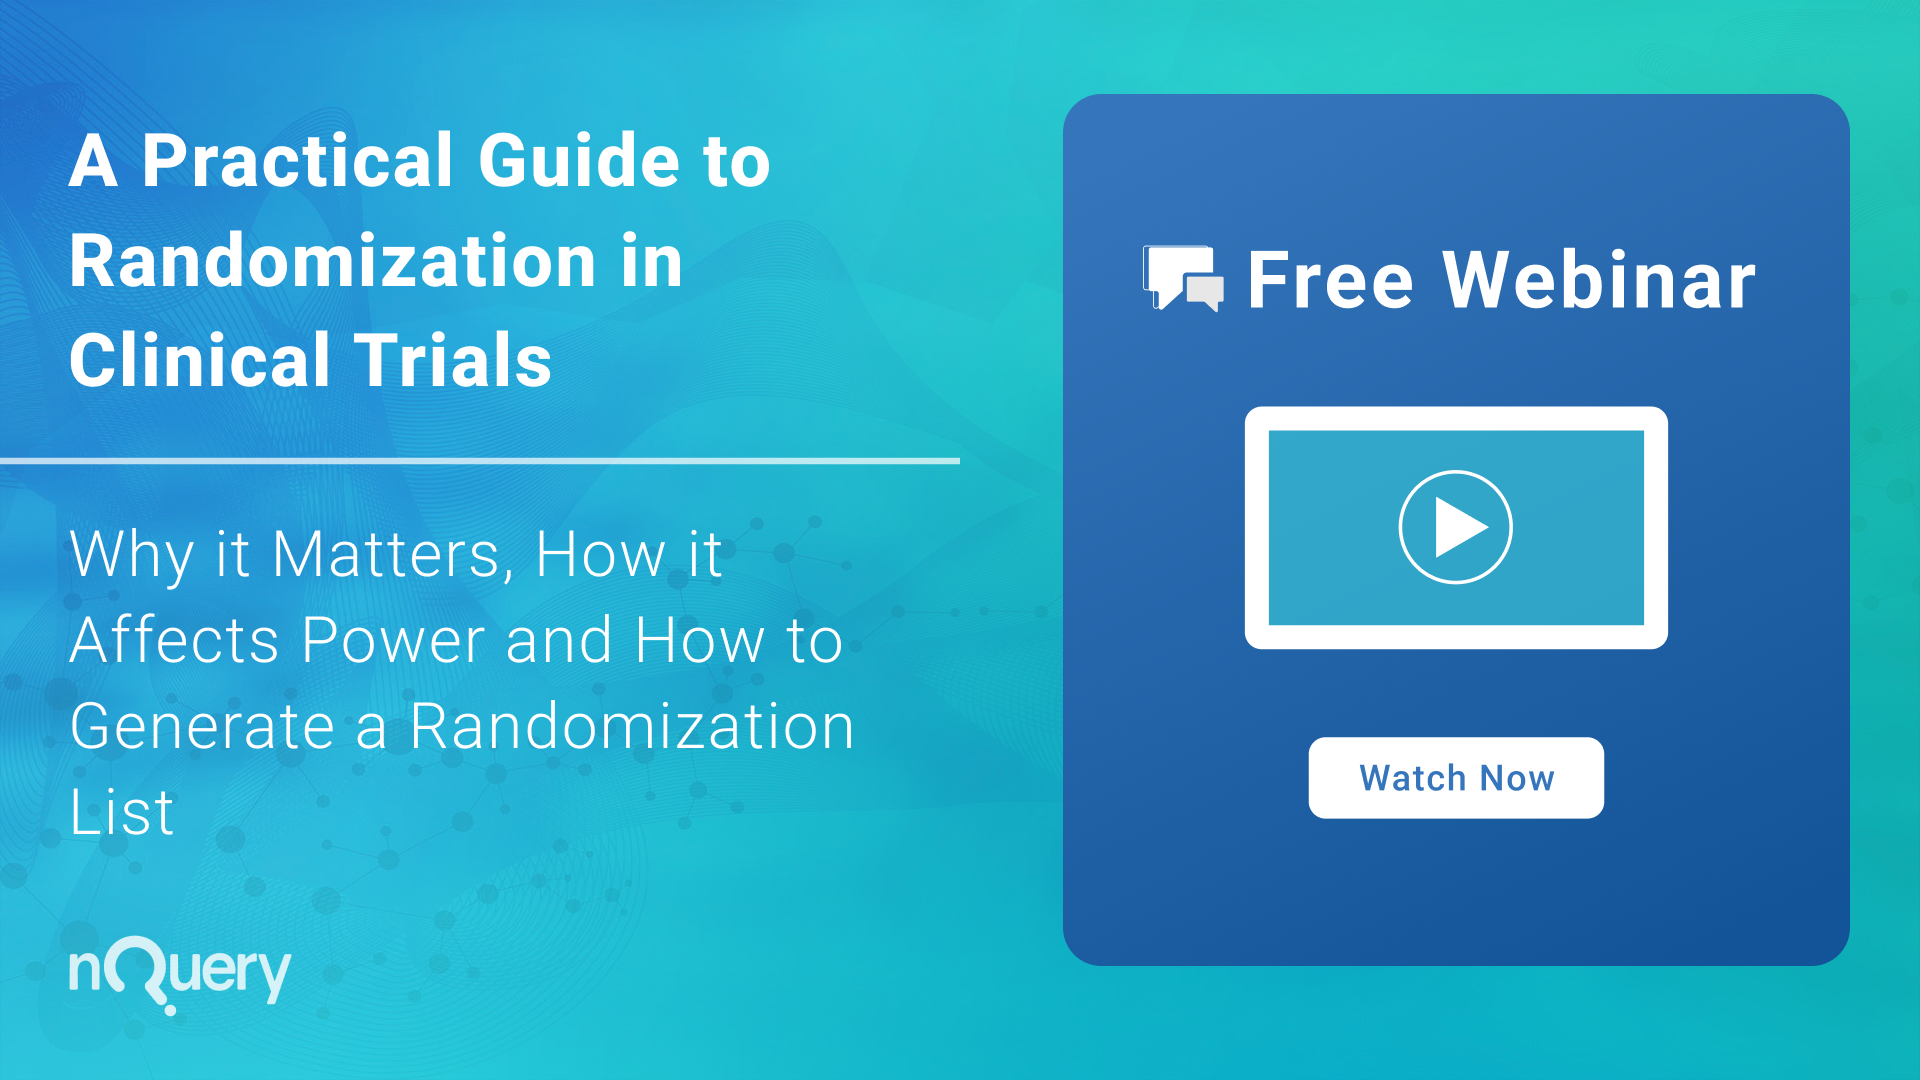 A Practical Guide to Randomization in Clinical Trials_Watch Now-1